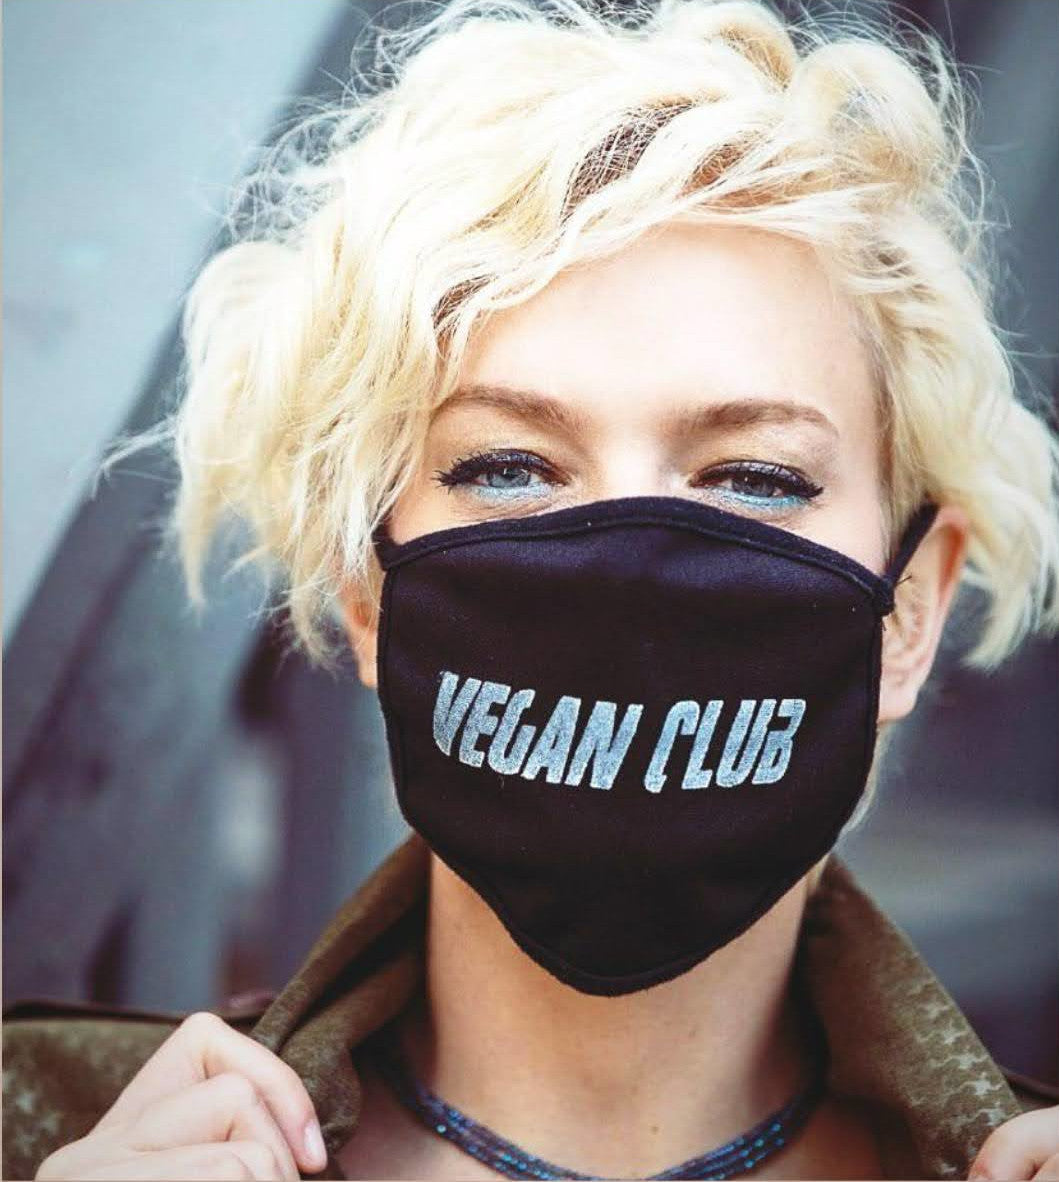 Vegan Club Mask. Fight with a Statement!